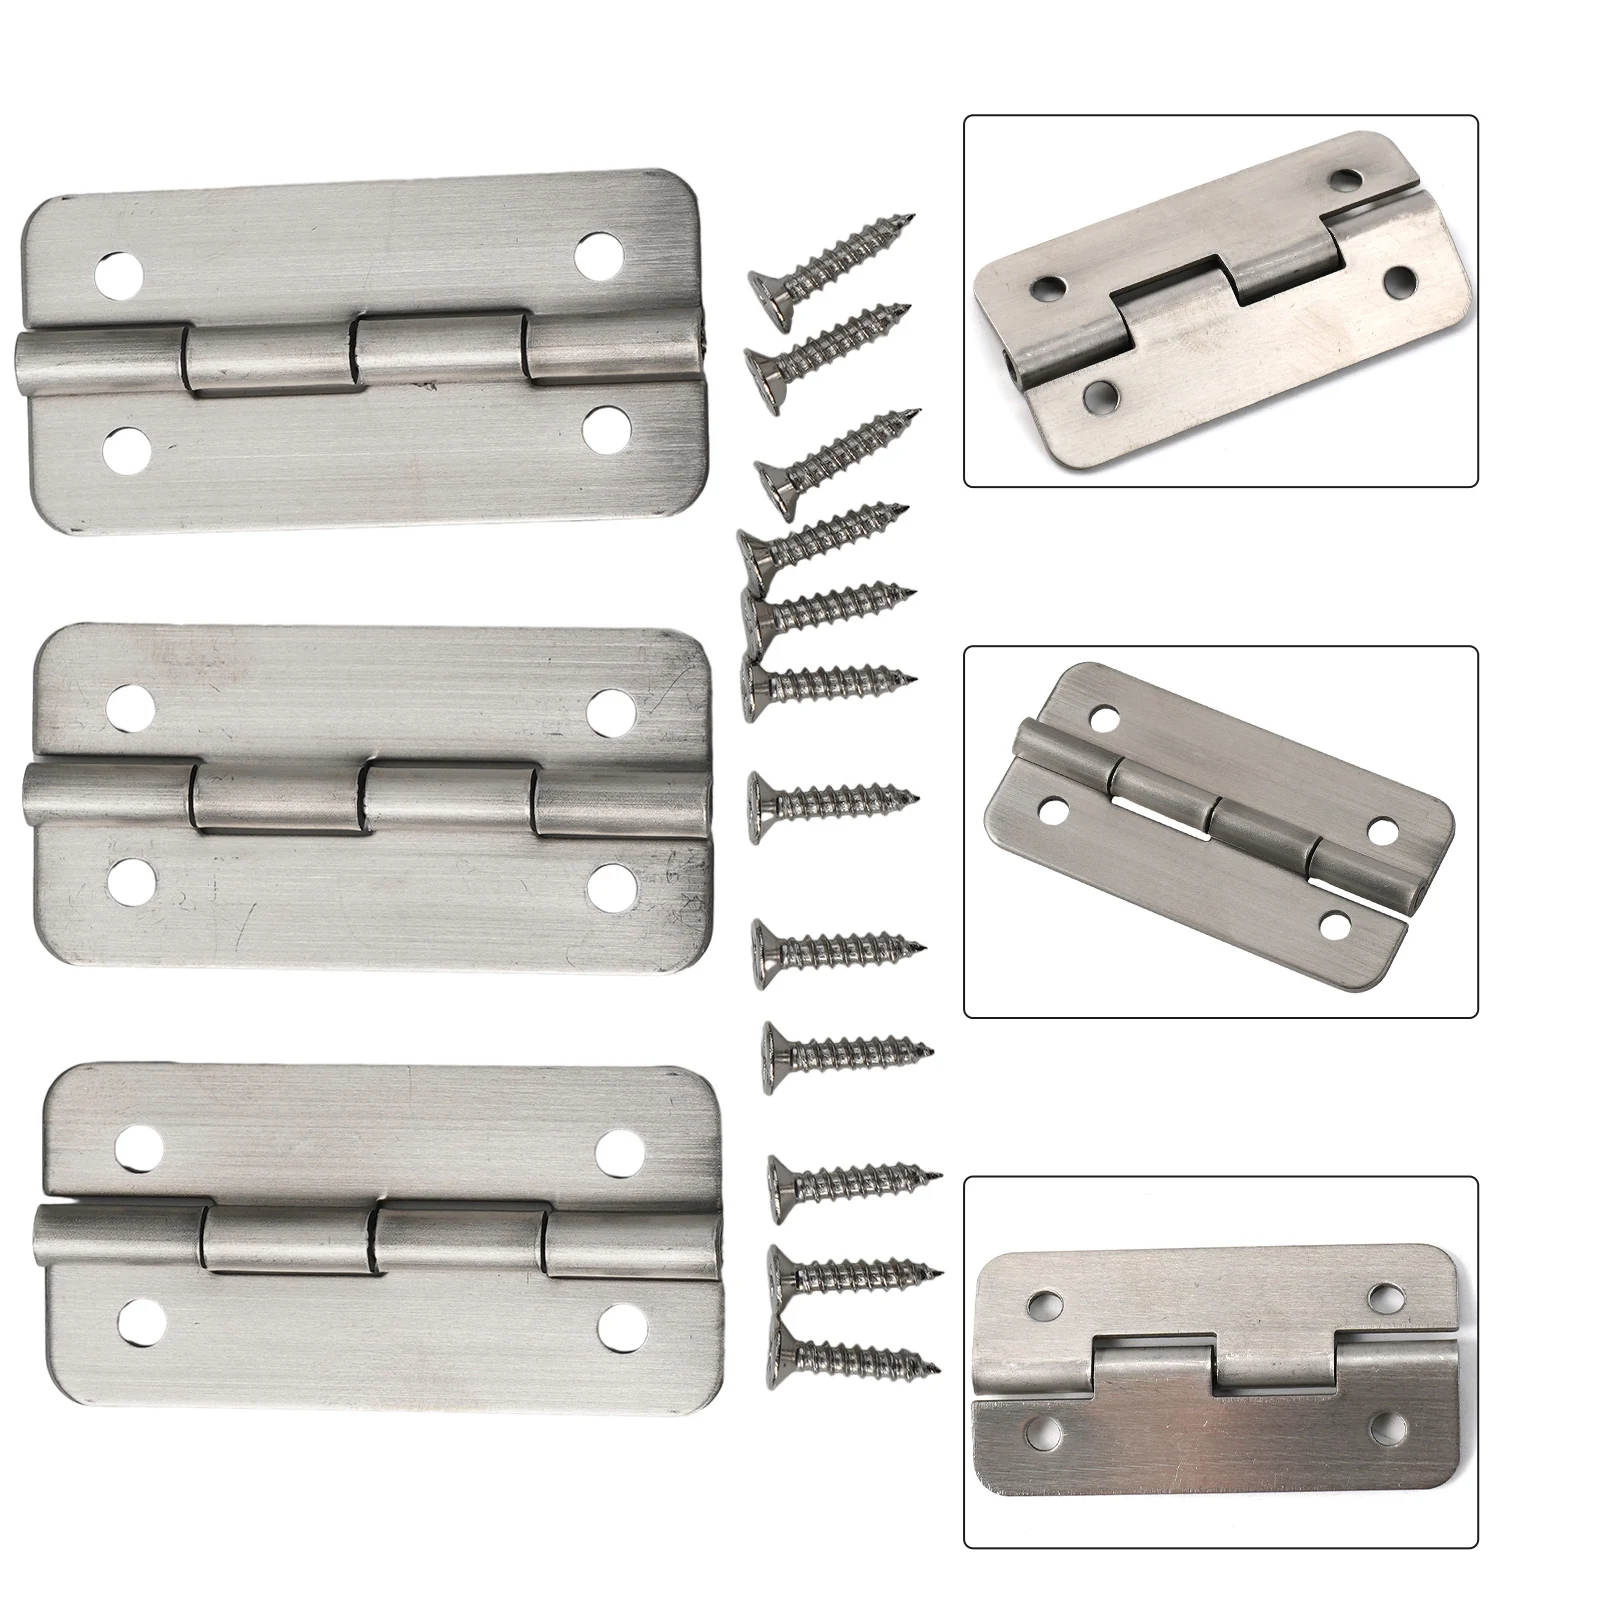 Screws Hinges Home Garden Cooler Cooler Parts For Igloo Garden Tools Hatchets Replacements 304 Stainless Steel 4pcs door butt hinges door frame black metal hinge with screws and t nut for aluminum extrusion profile 20s 30s